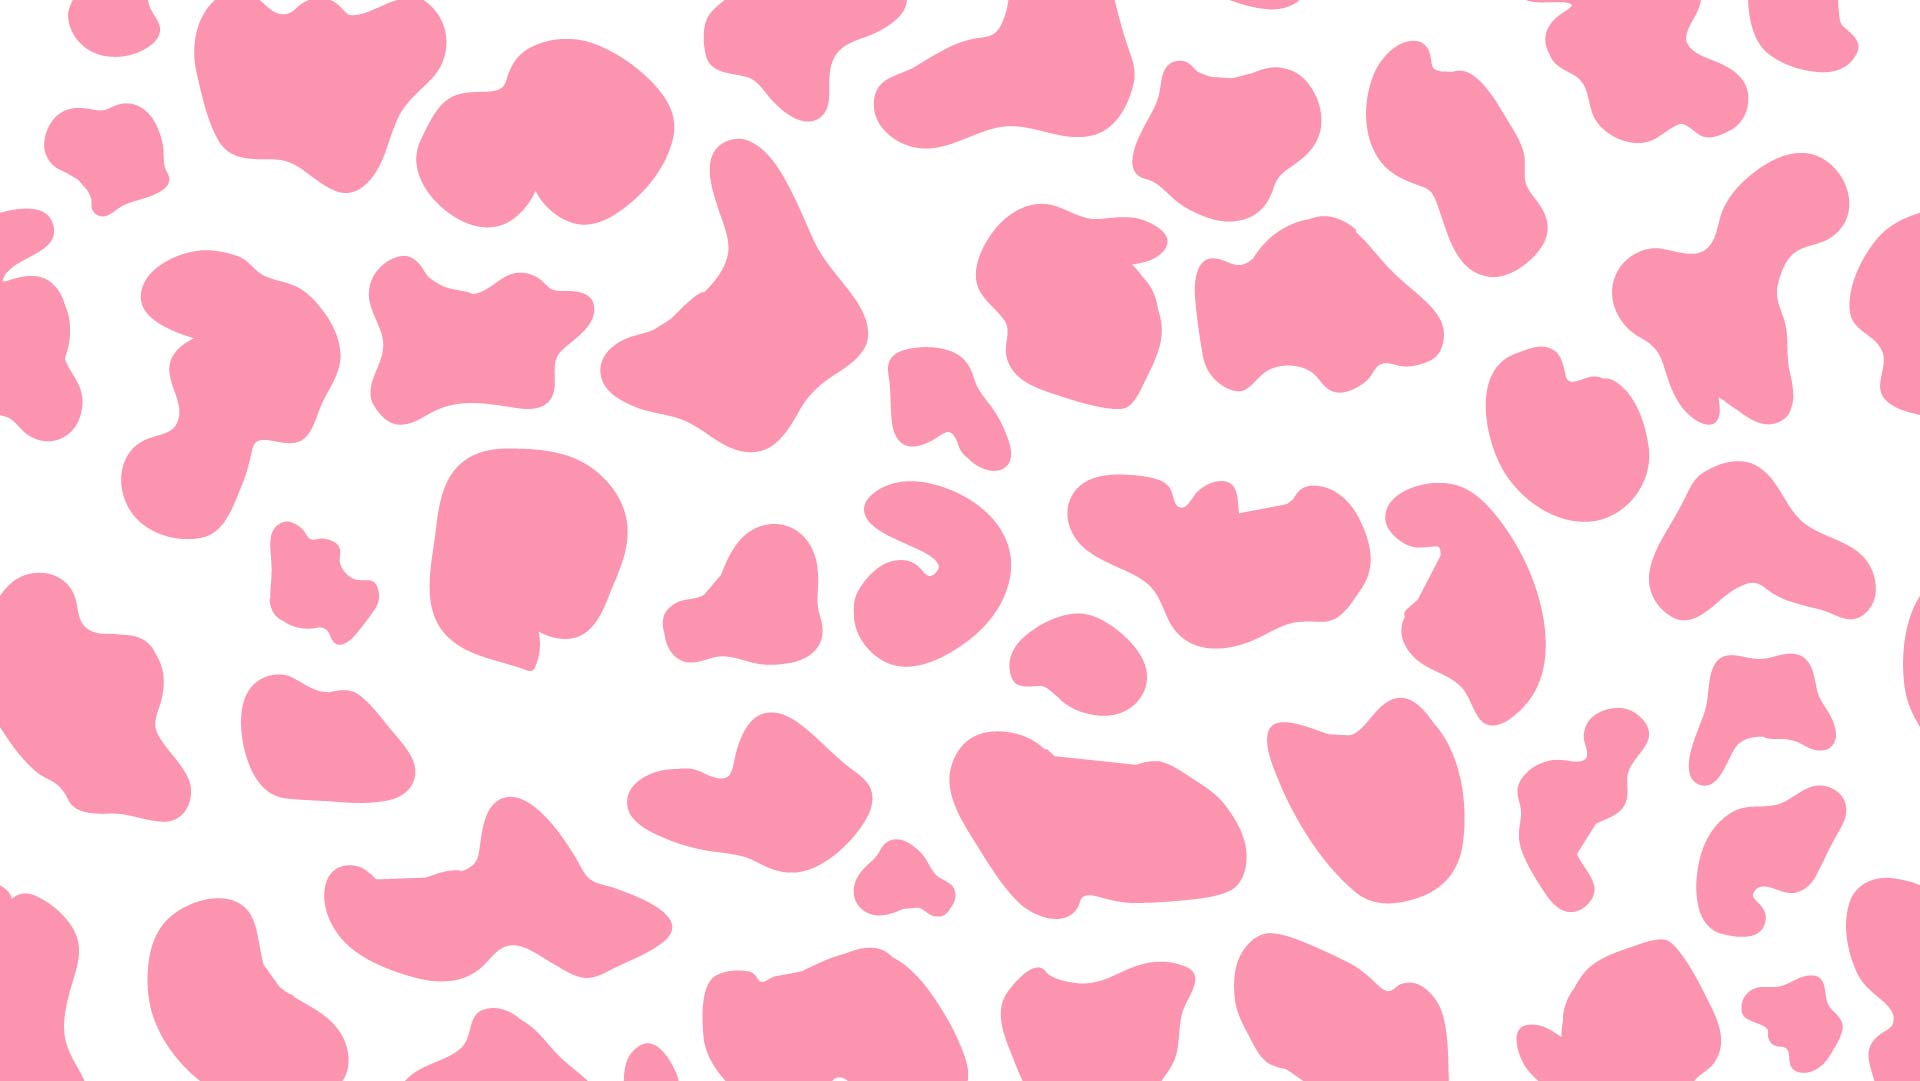 Cow print Wallpapers Download